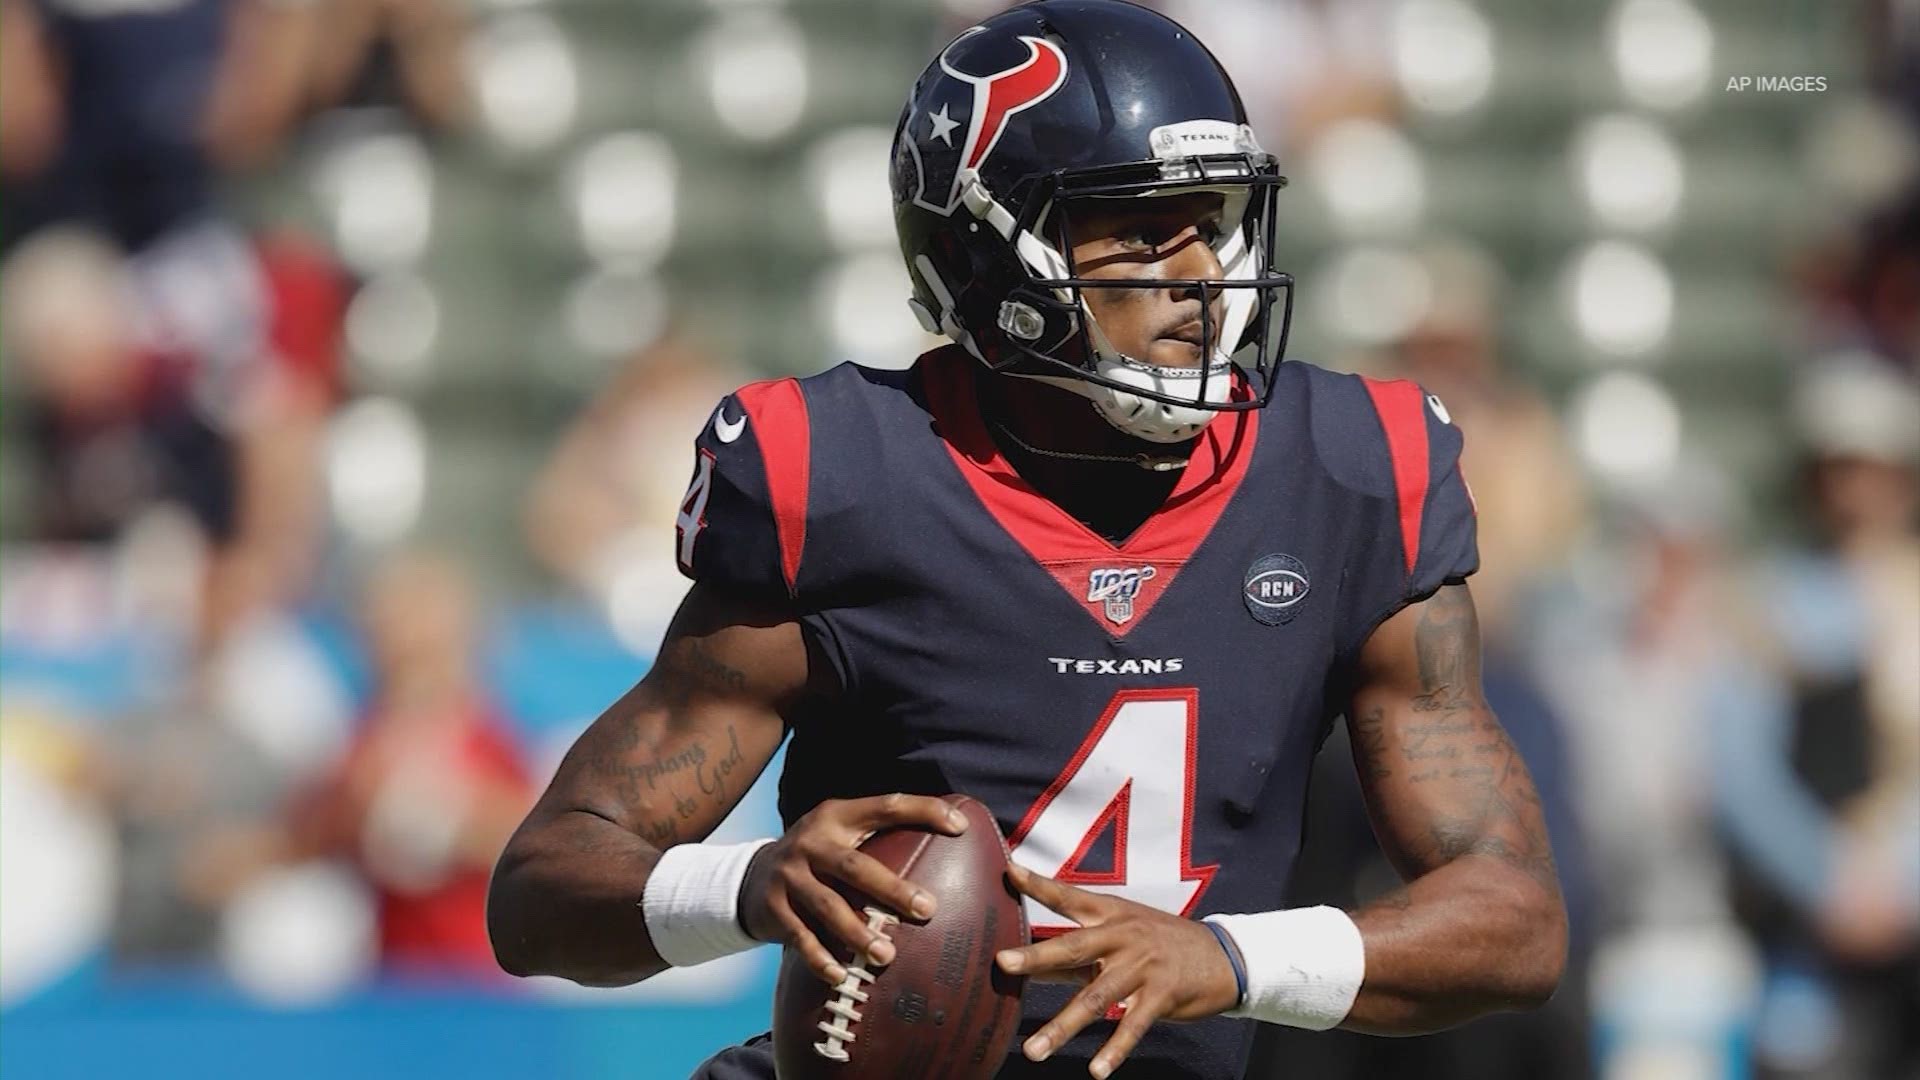 Watson scrubbed all references to the Houston Texans from his Instagram and Twitter accounts on Saturday.